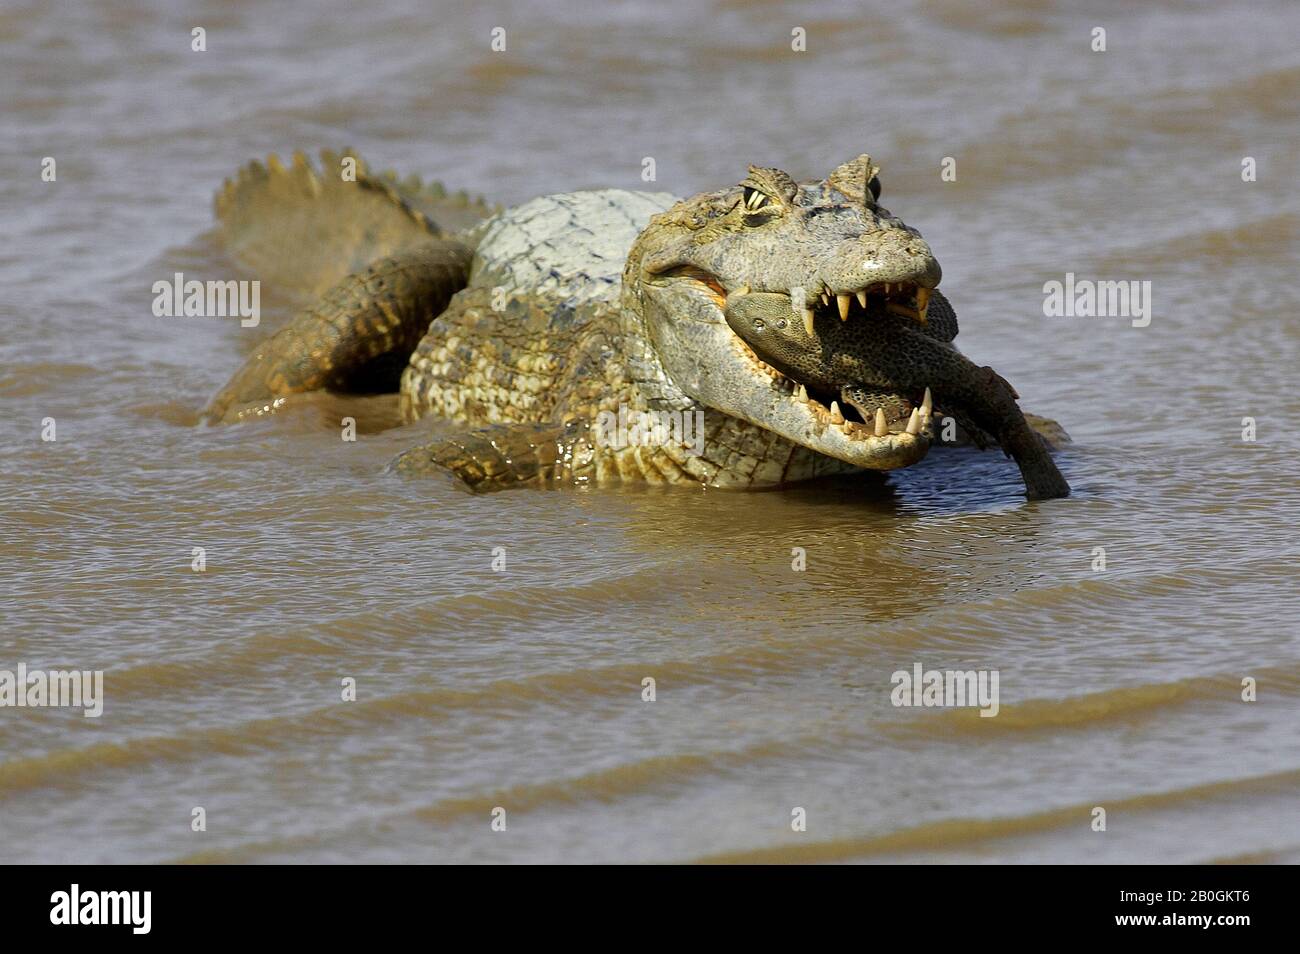 Spectacled Caiman, caiman crocodilus, Catching Fish in River, Los Lianos in Venezuela Stock Photo